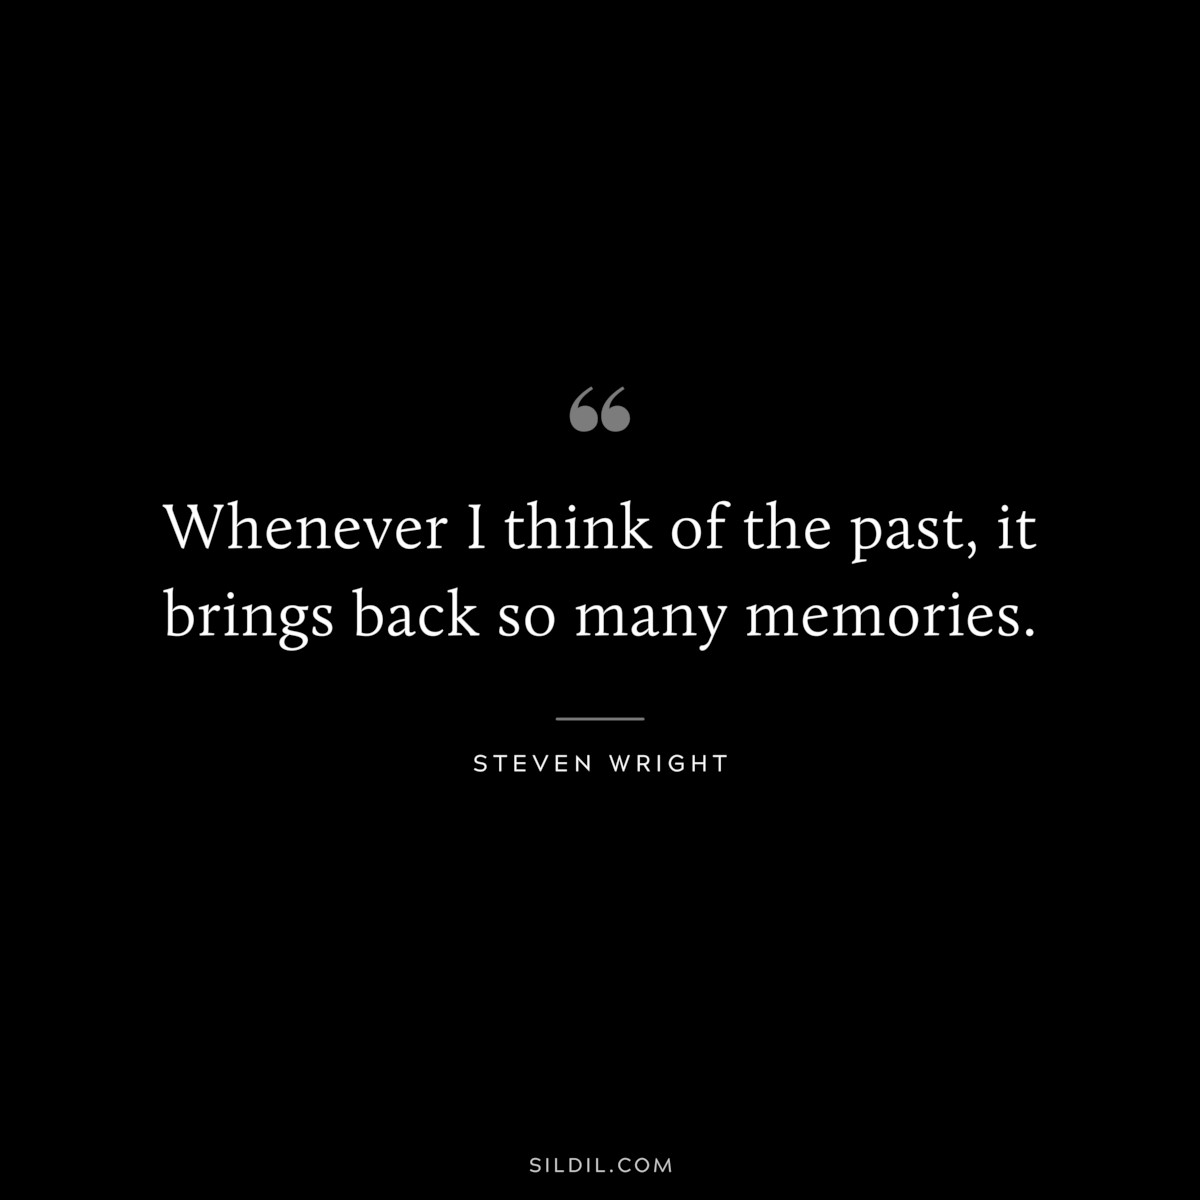 Whenever I think of the past, it brings back so many memories. ― Steven Wright